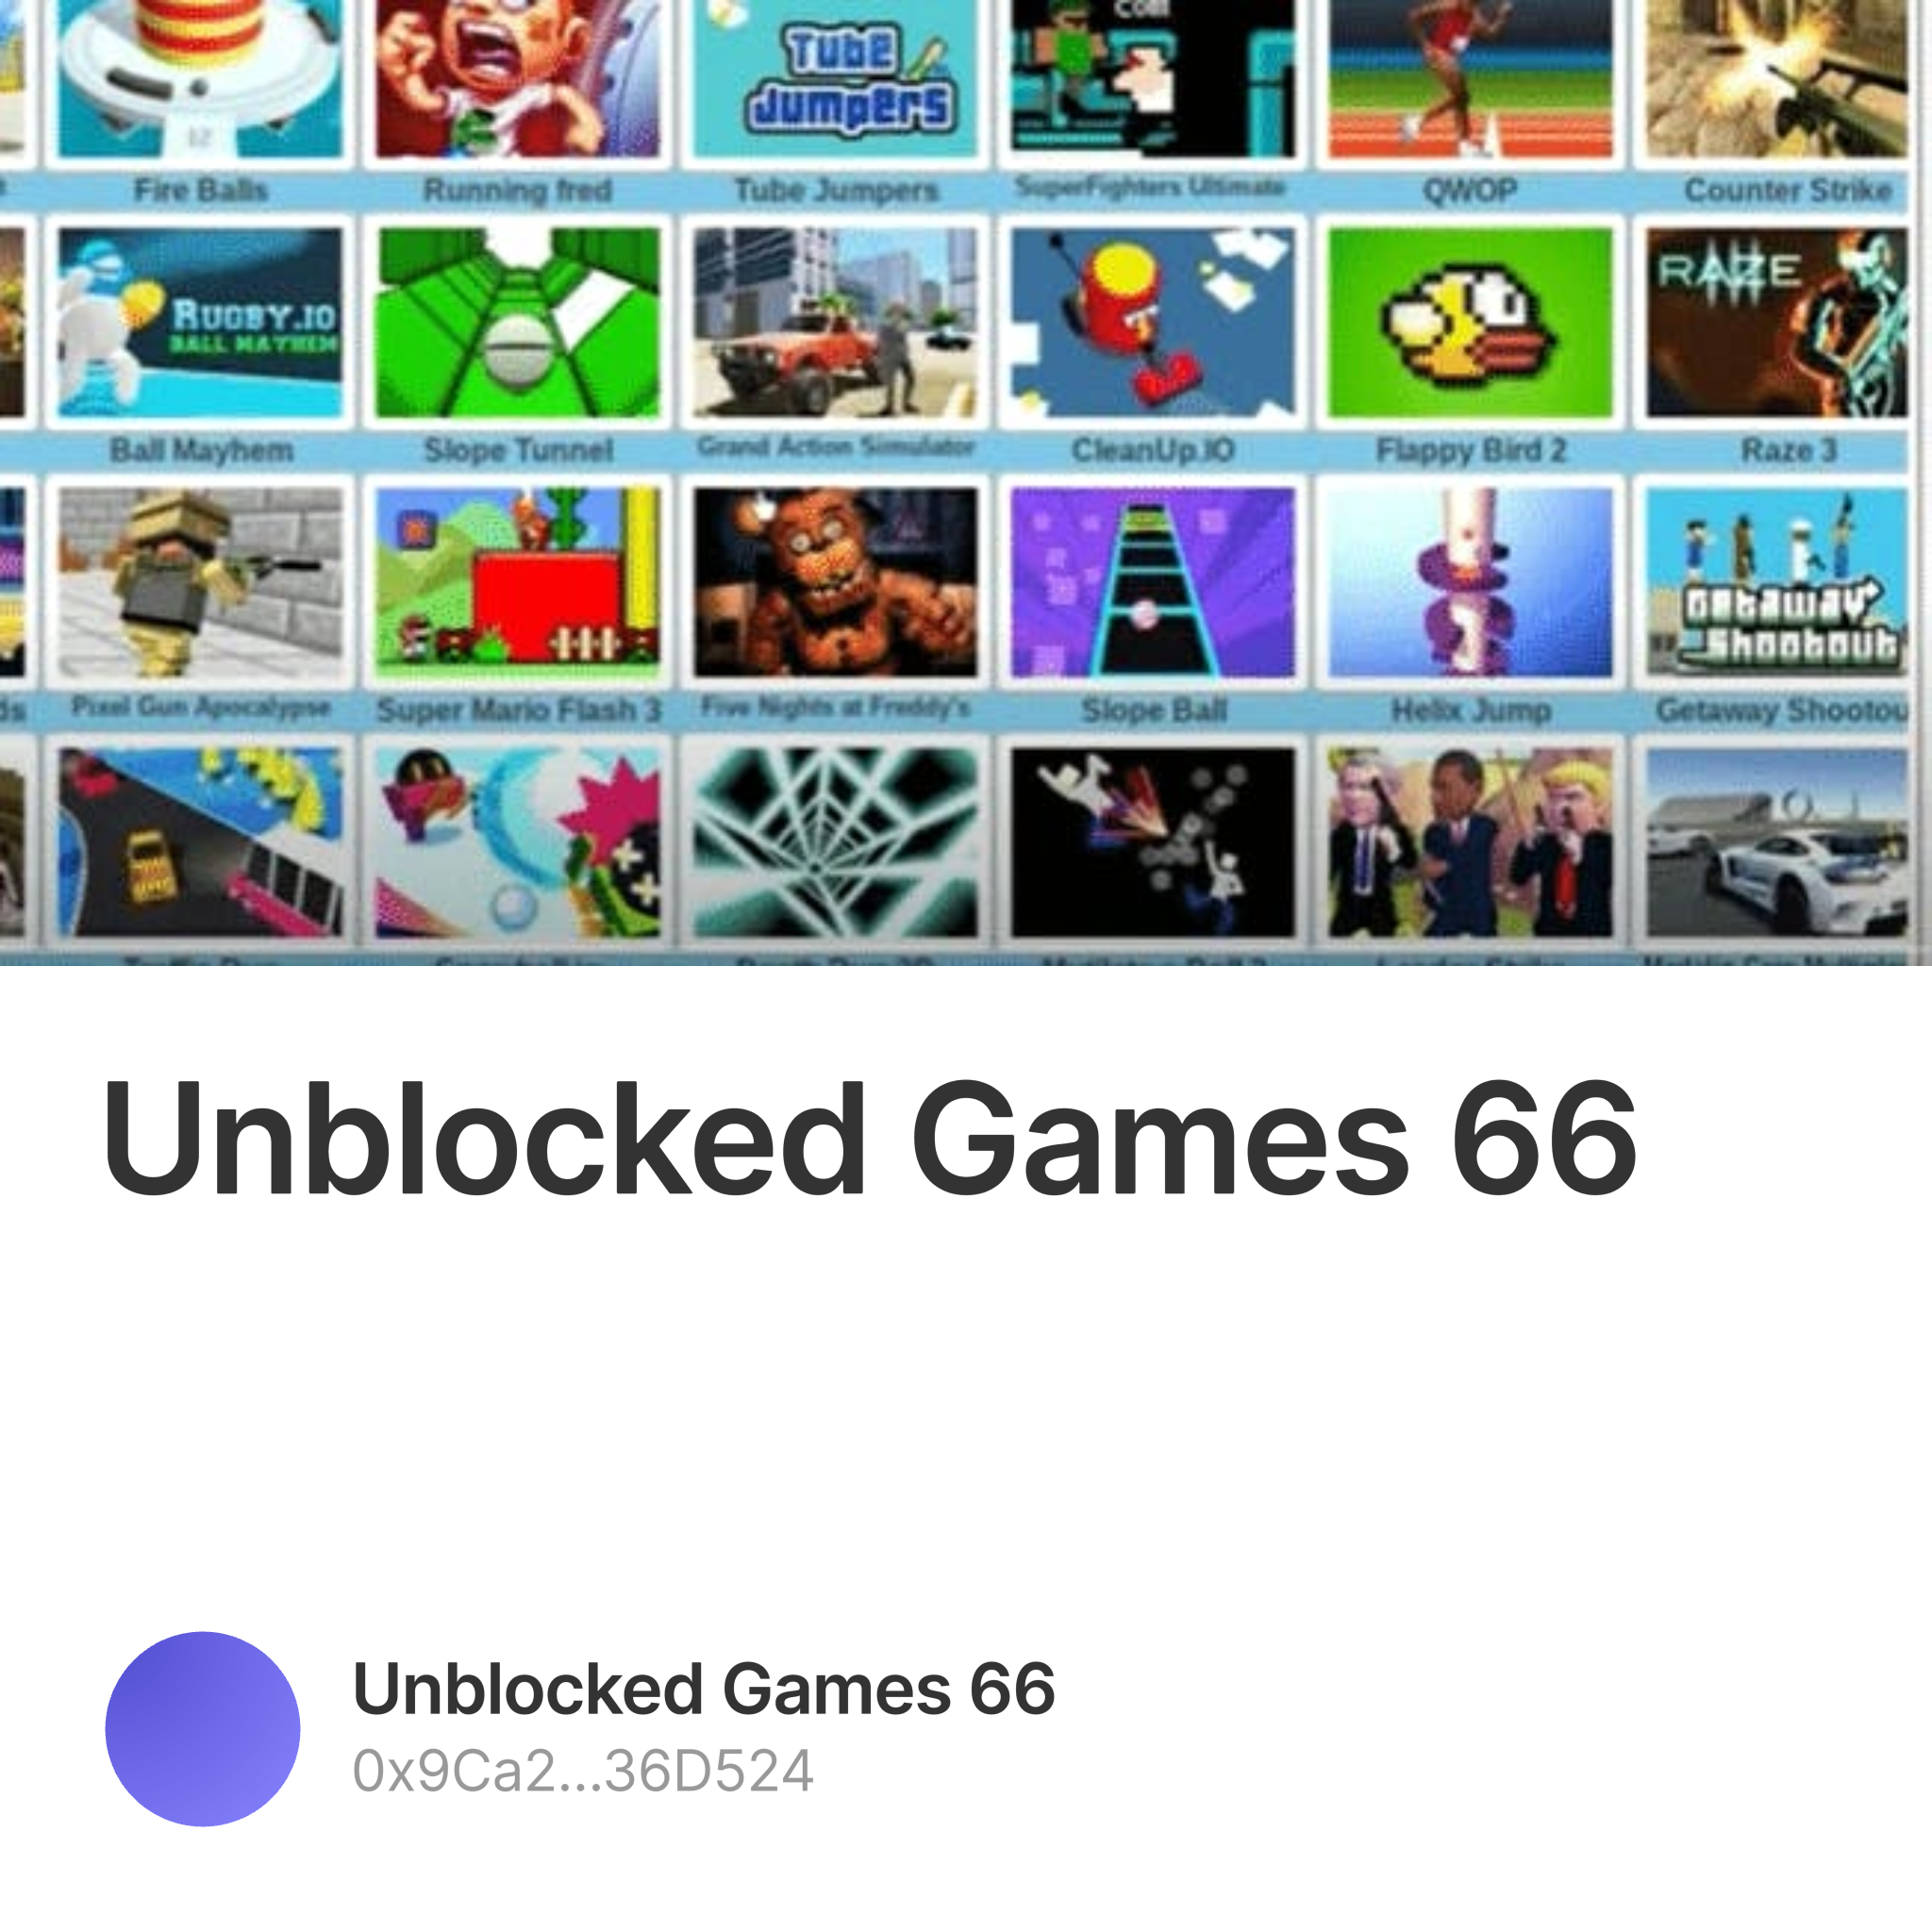 Unblocked Games 66 — Unblocked Games 66